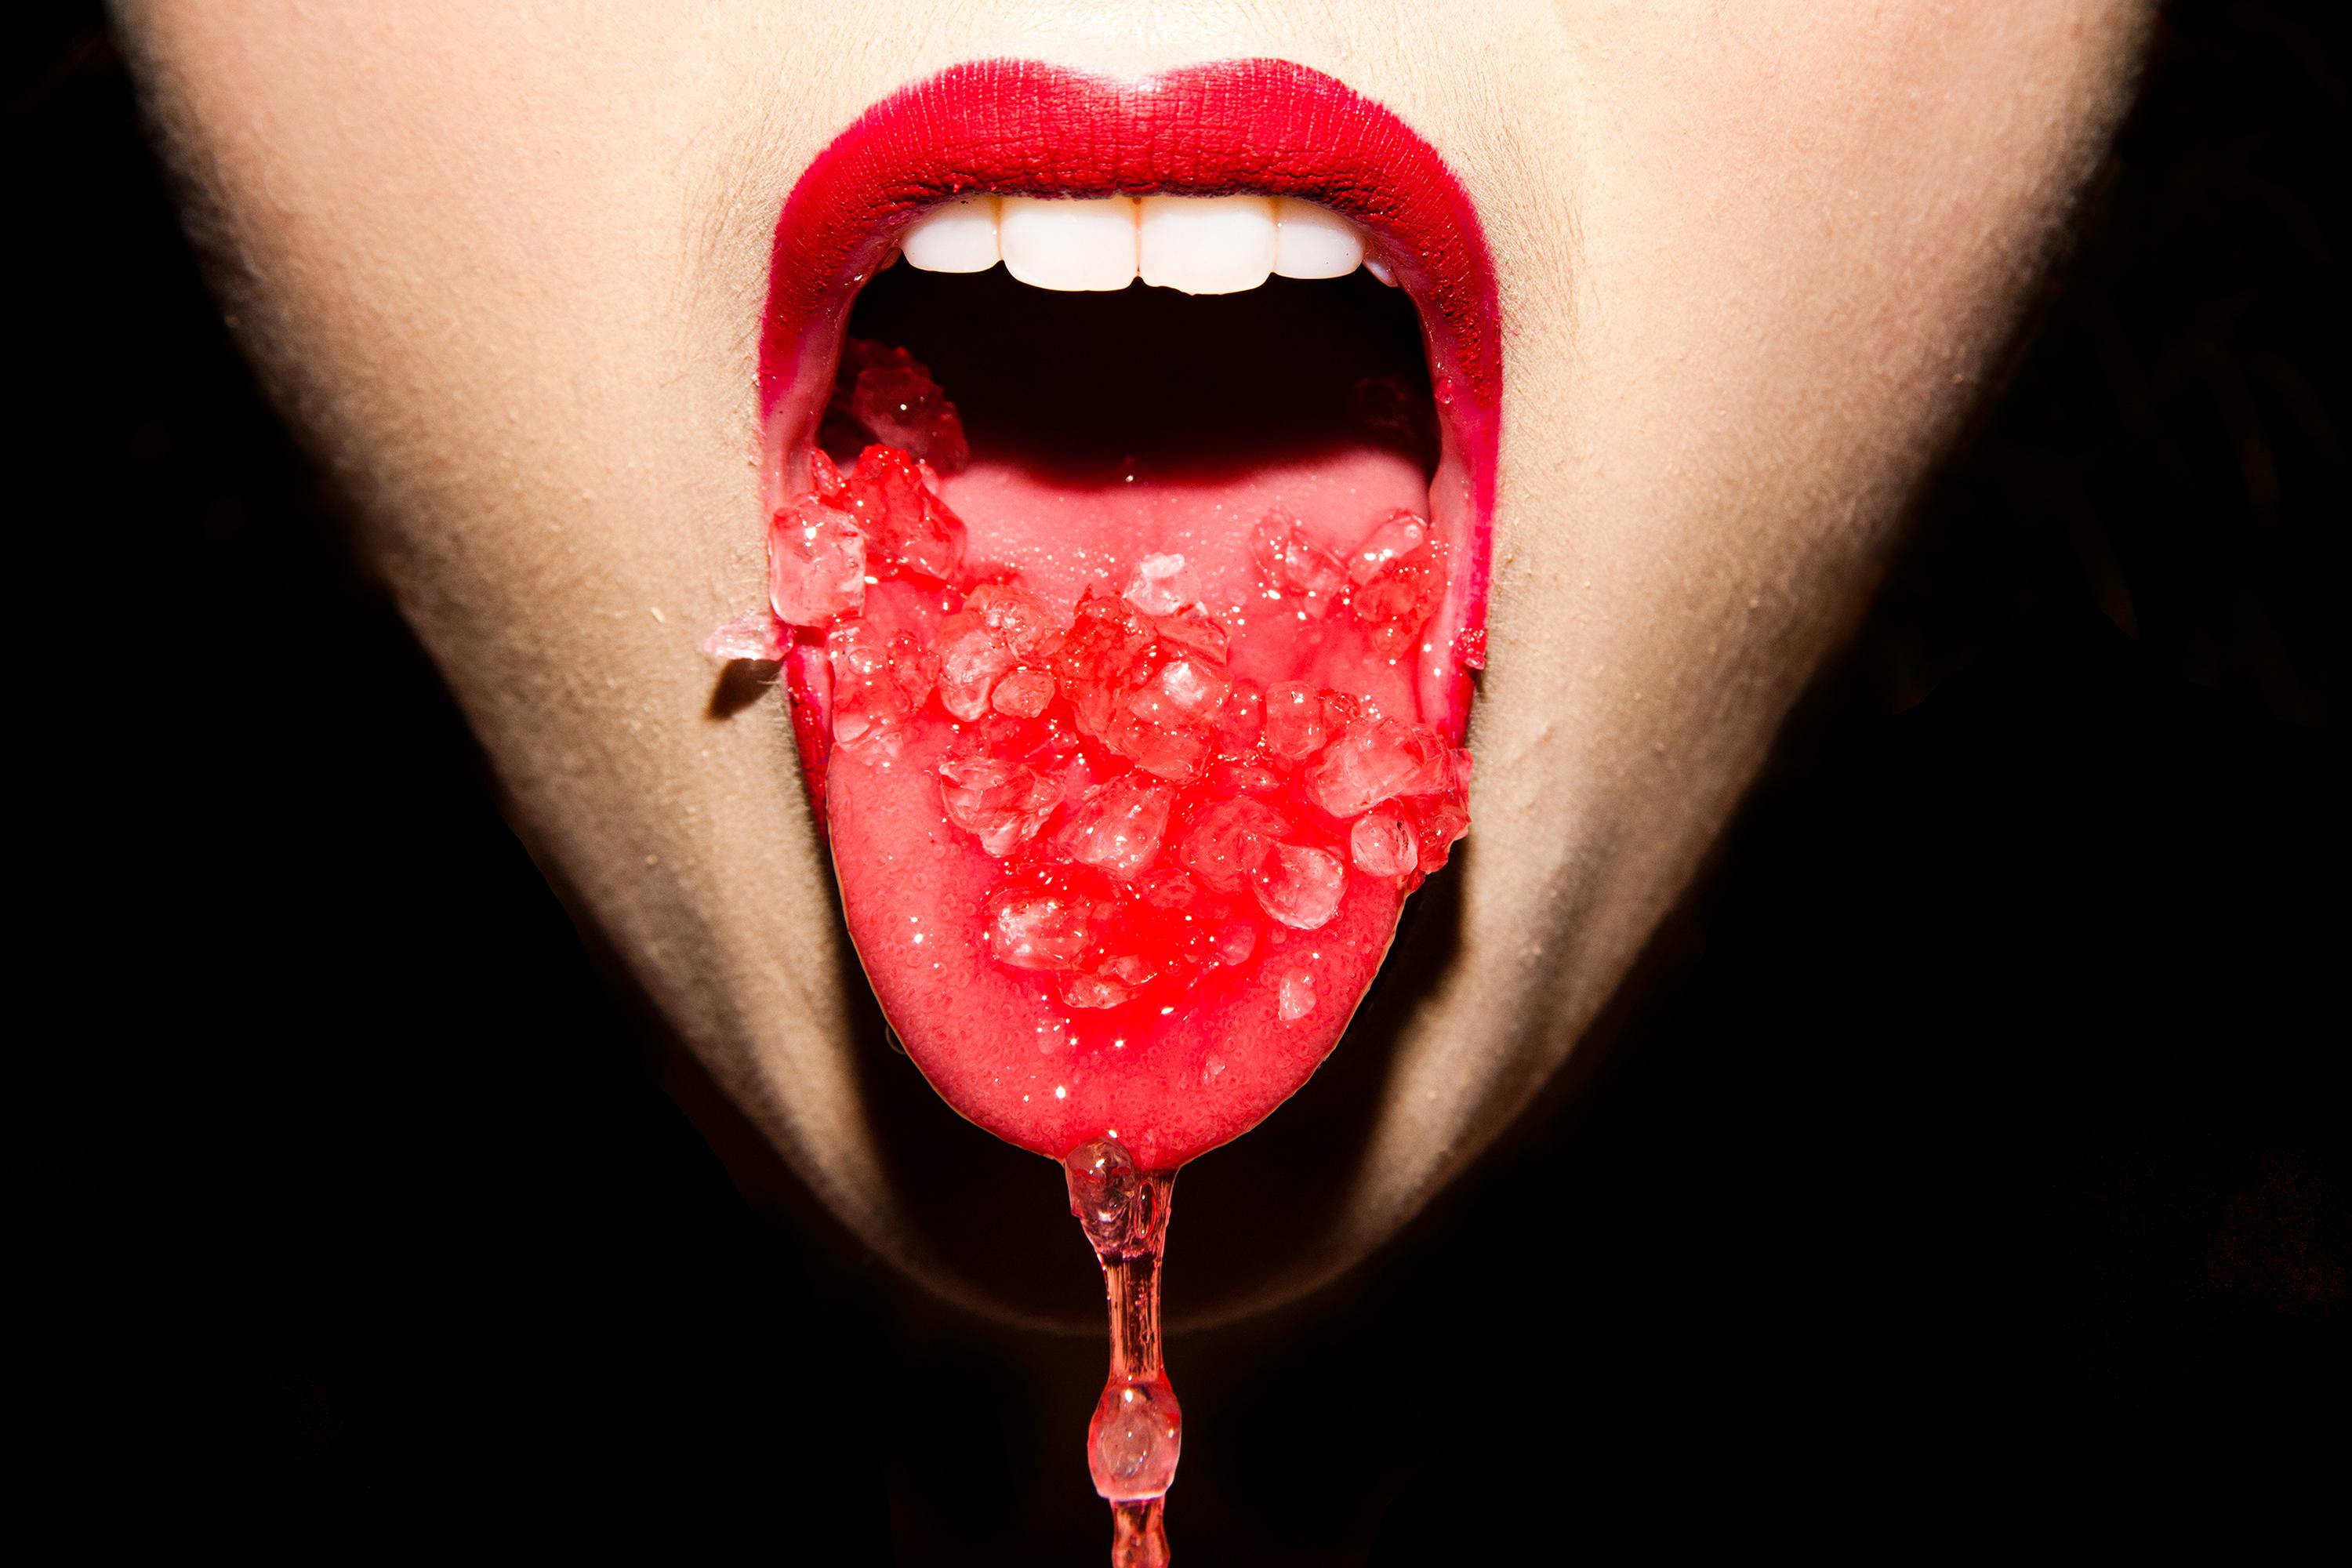 Series: Mouths
Chromogenic Print on Kodak Endura Luster Paper
All available sizes and editions:
20" x 30"
30" x 40"
40" x 60"
48" x 72"
63" x 84"
Editions of 3 + 2 Artist Proofs

Tyler Shields is a photographer, film director, and writer, best known